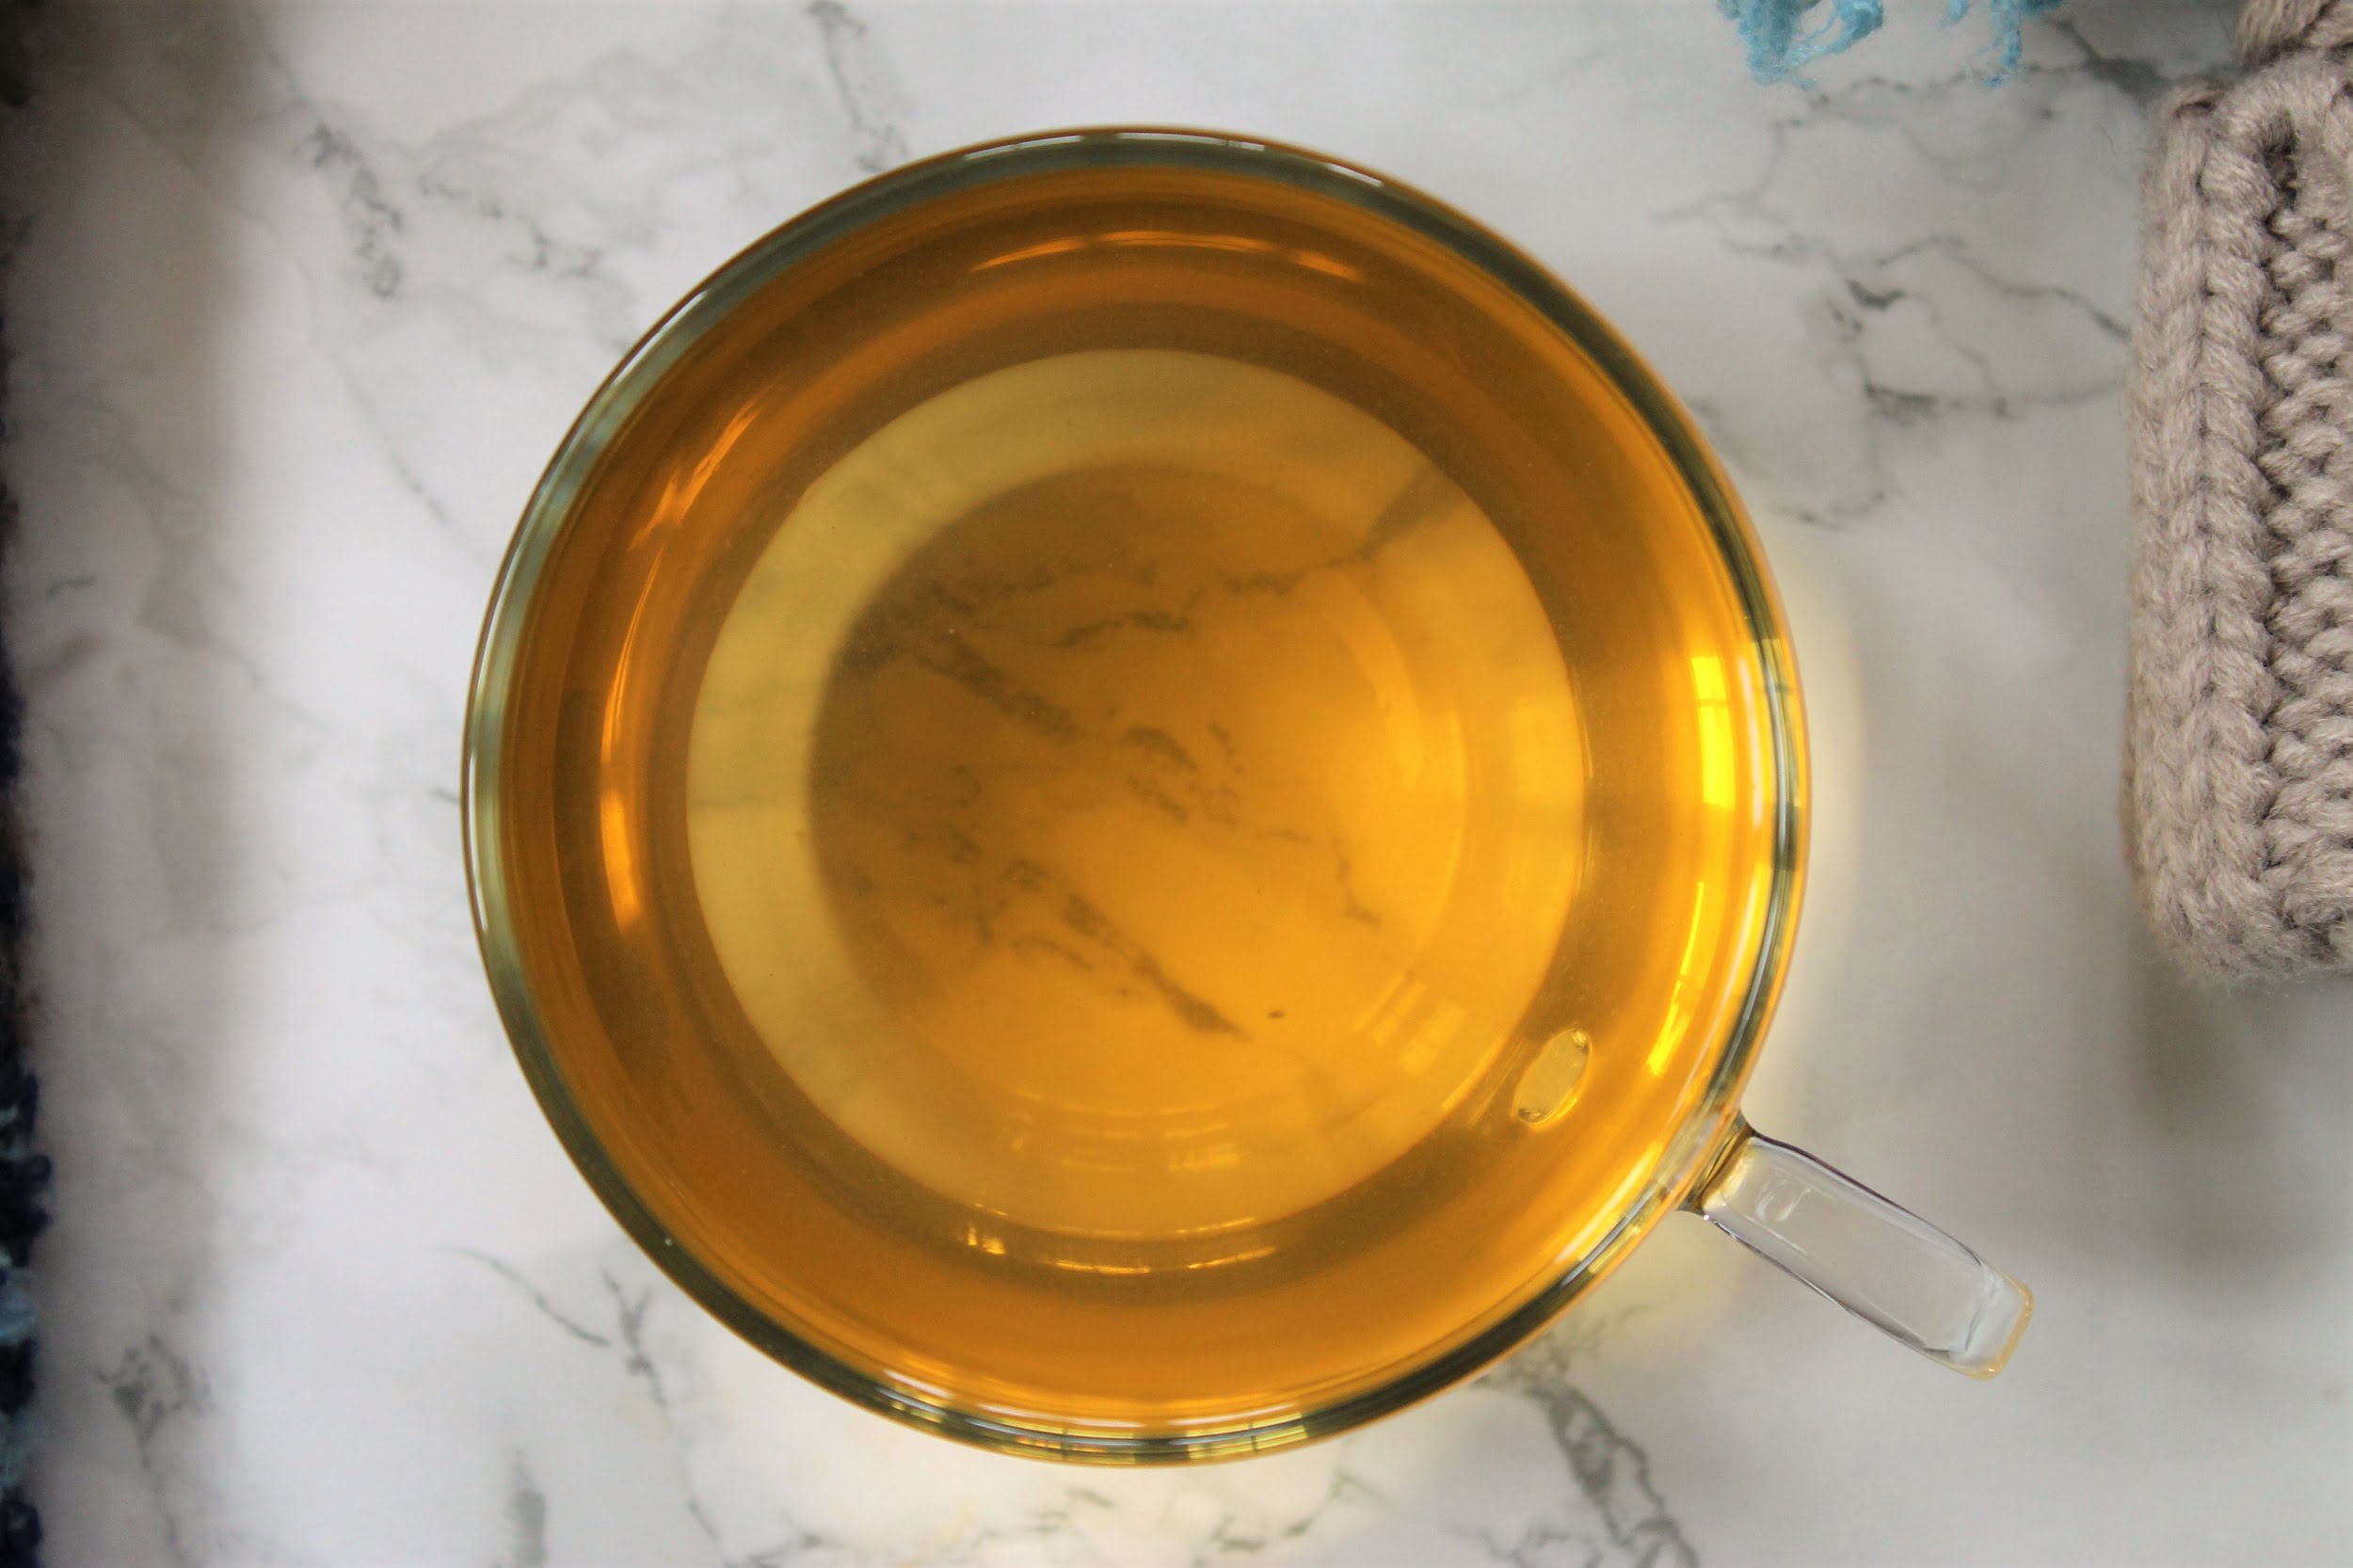 white tea review in glass teacup